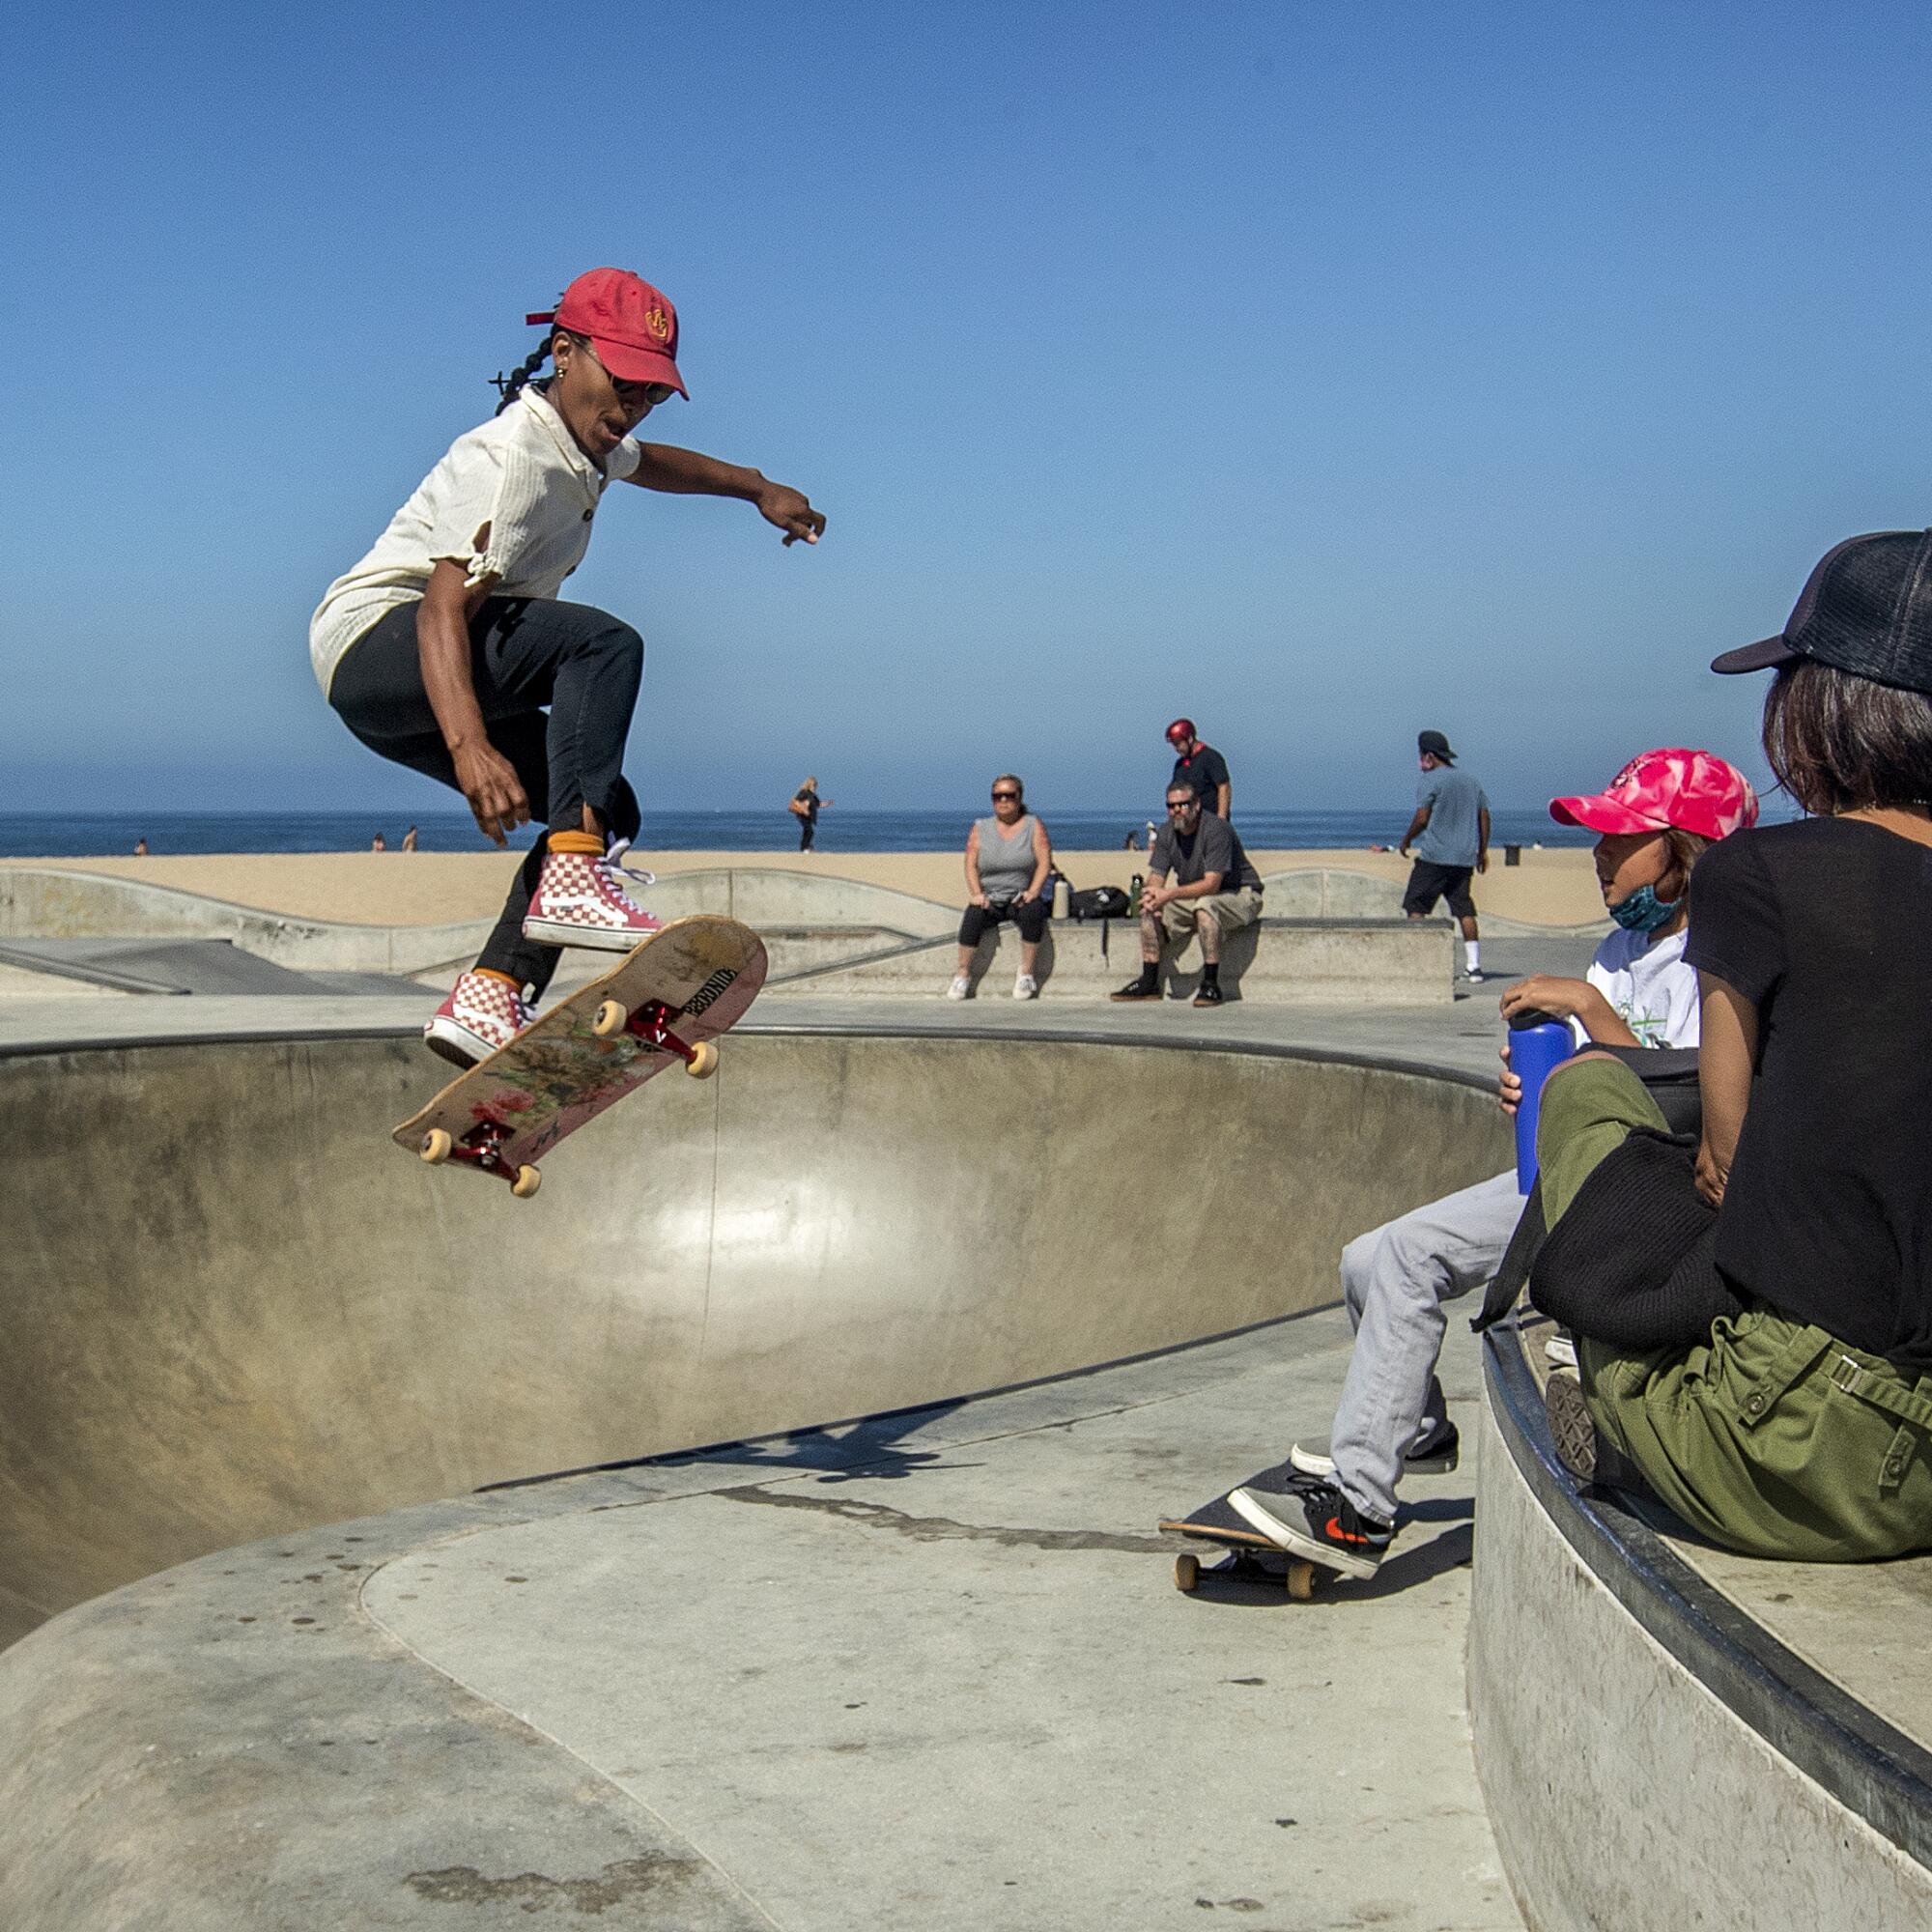 Go Skate Skateboarding is a Southern California tradition.